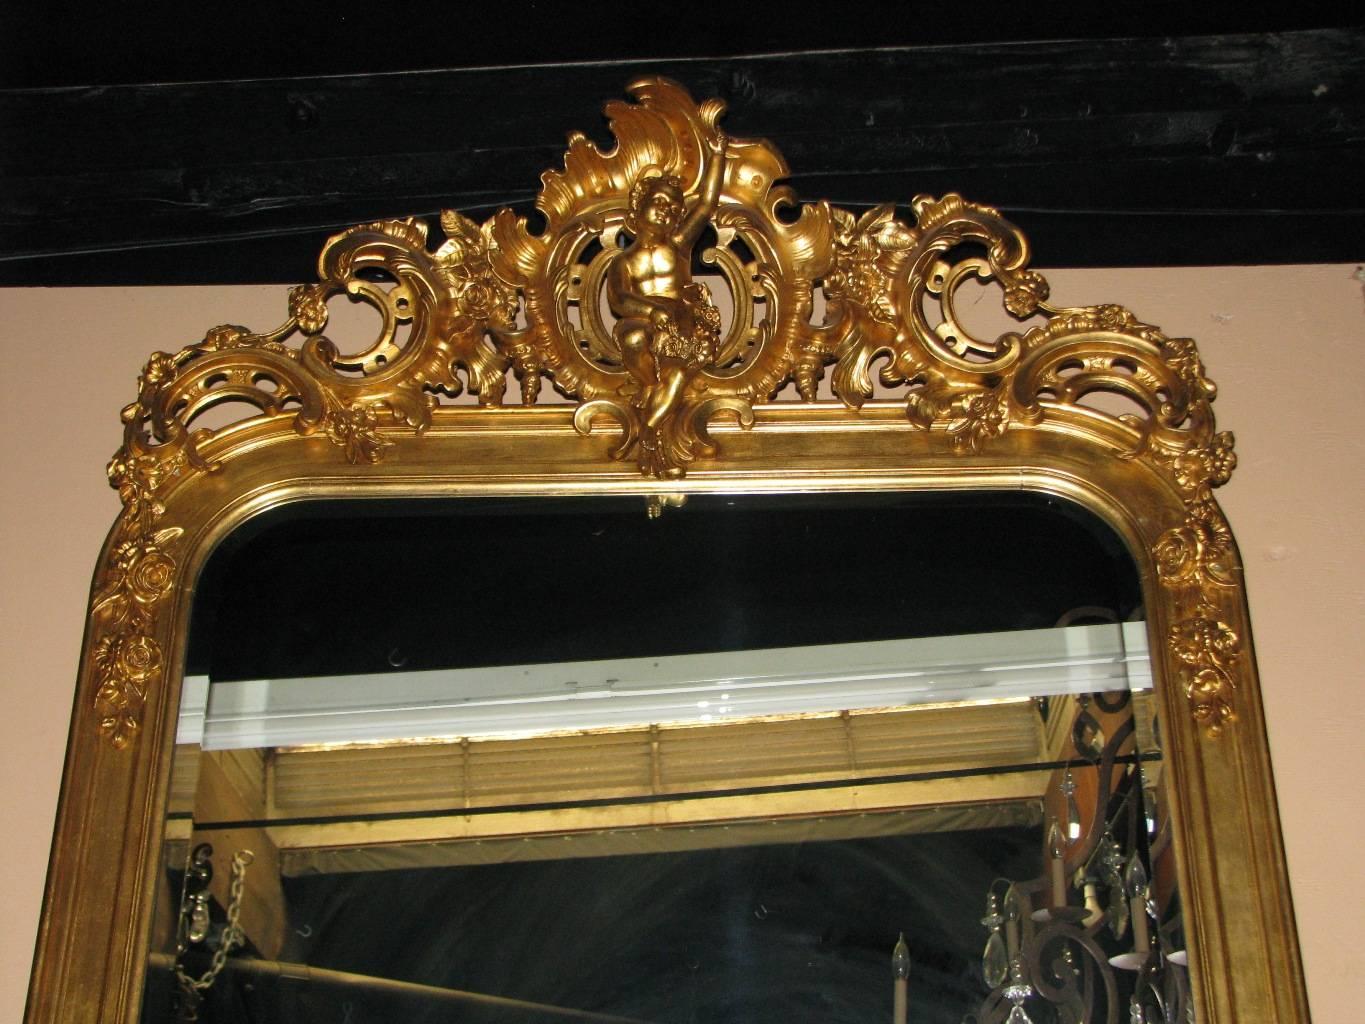 Extraordinary 19th century French Louis XV style gilt mirror with Sèvres Porcelain plaques. 
The mirror is topped by rocaille ornament centered by beautiful seated putti holding a wreath. The sides are decorated with two hand-painted porcelain